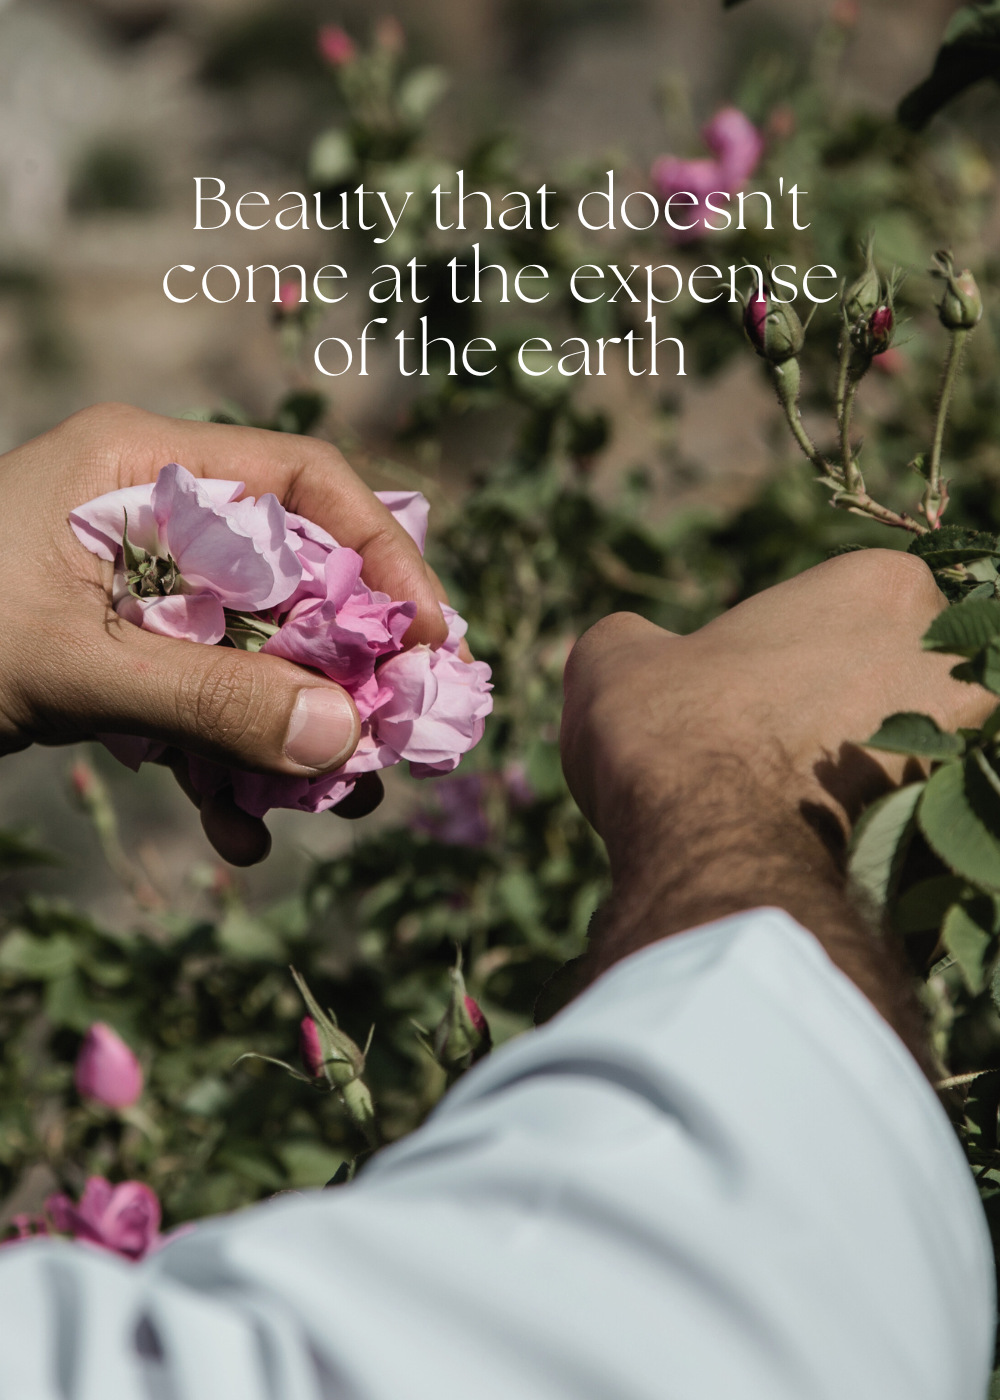 Beauty that does not come at the expense of the earth. Image of man picking damask roses from plantation